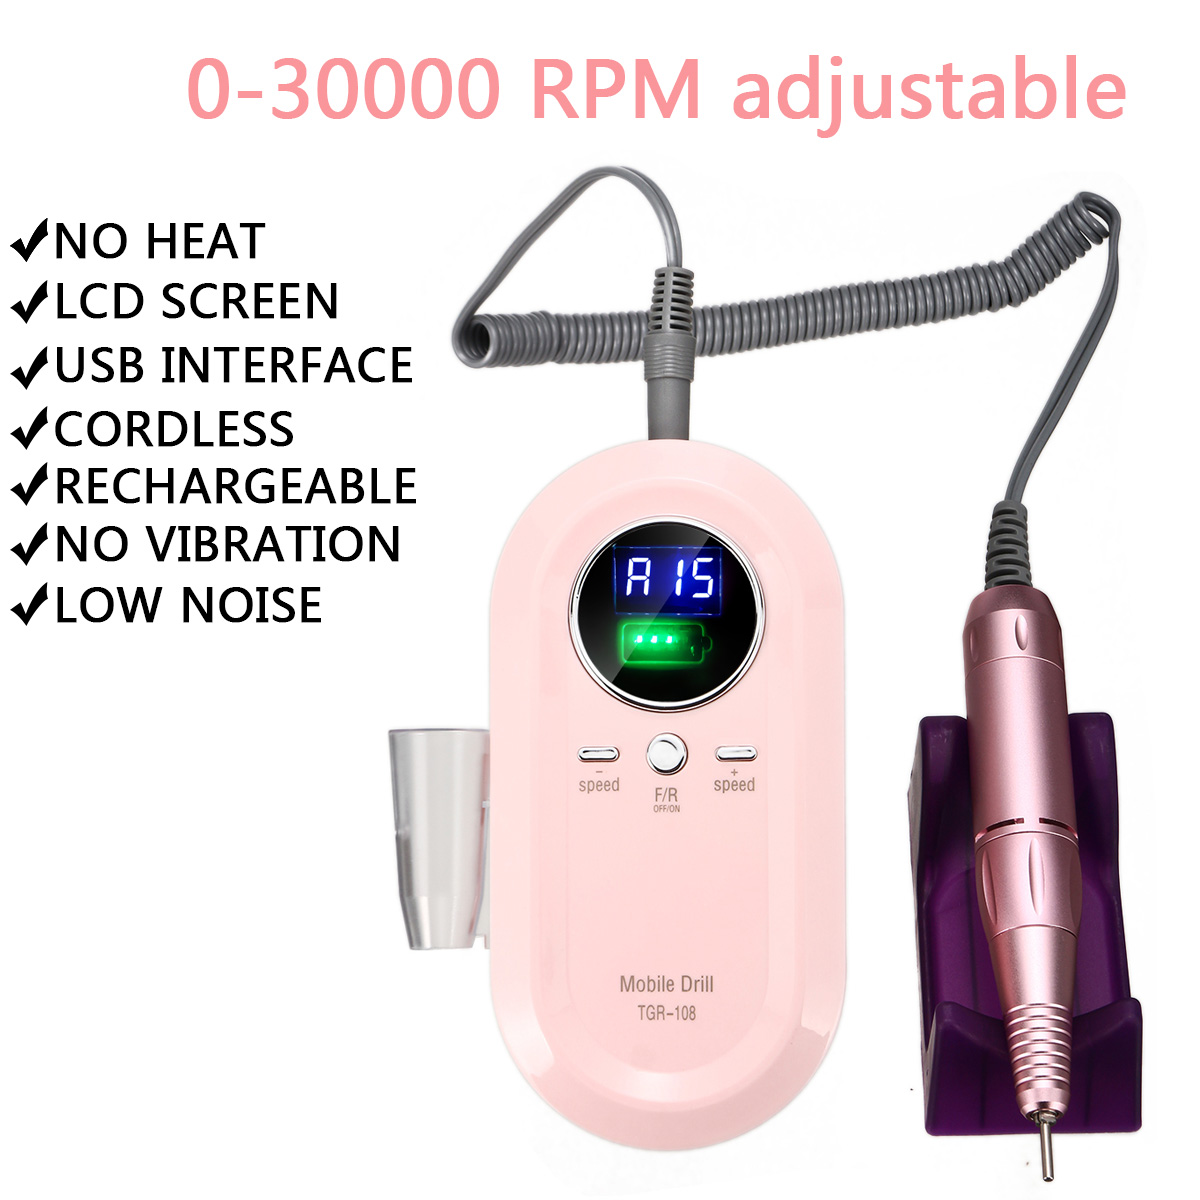 LED-Rechargeable-Polisher-Electric-Nail-Art-Drill-File-Manicure-Machine-Tools-1620589-4